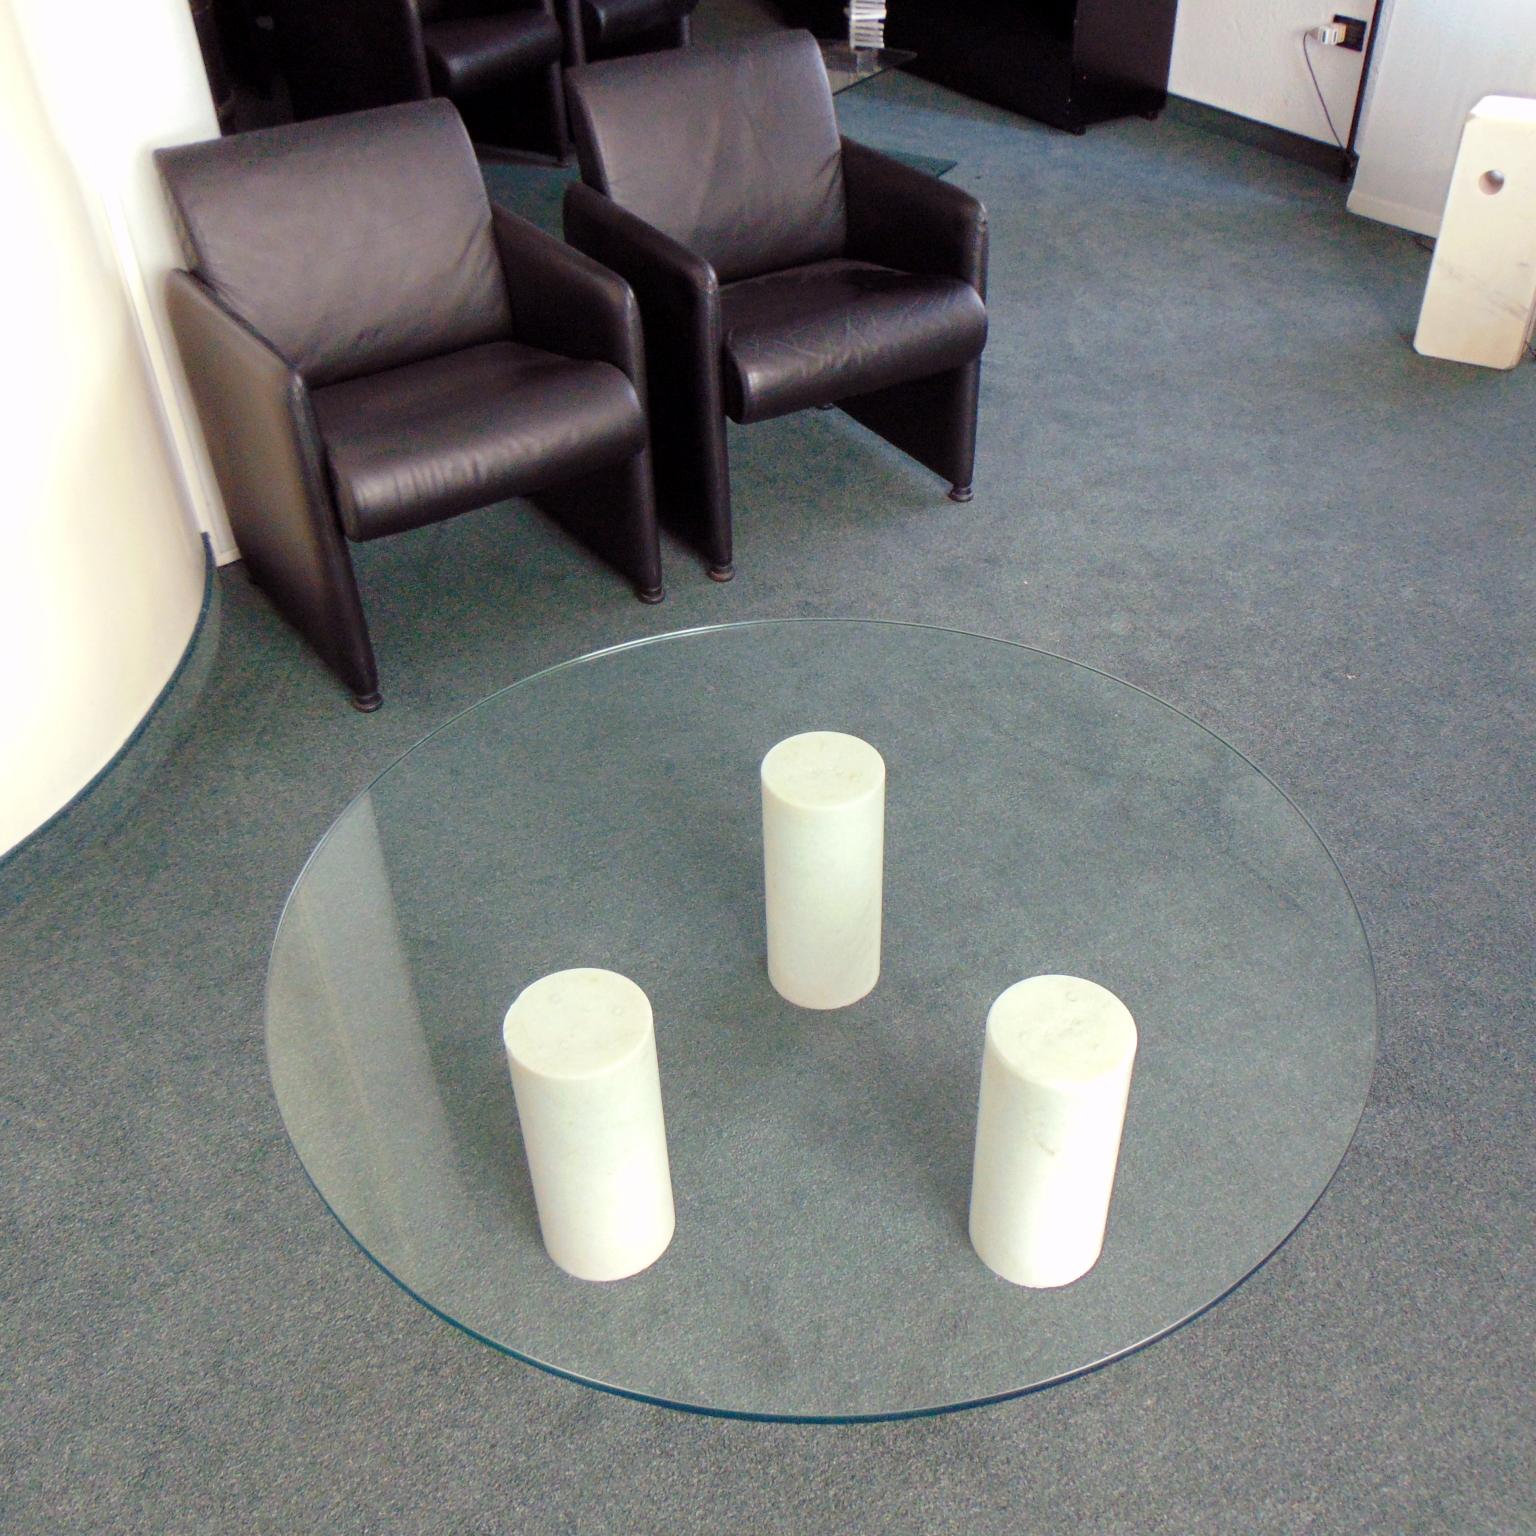 This round, low table has three sculptural cylindric legs in a rare white marble originating from Brescia, Italy. It is a very white marble with crystal inclusions. The legs are polished and very slightly rounded up in the upper part. The glass top